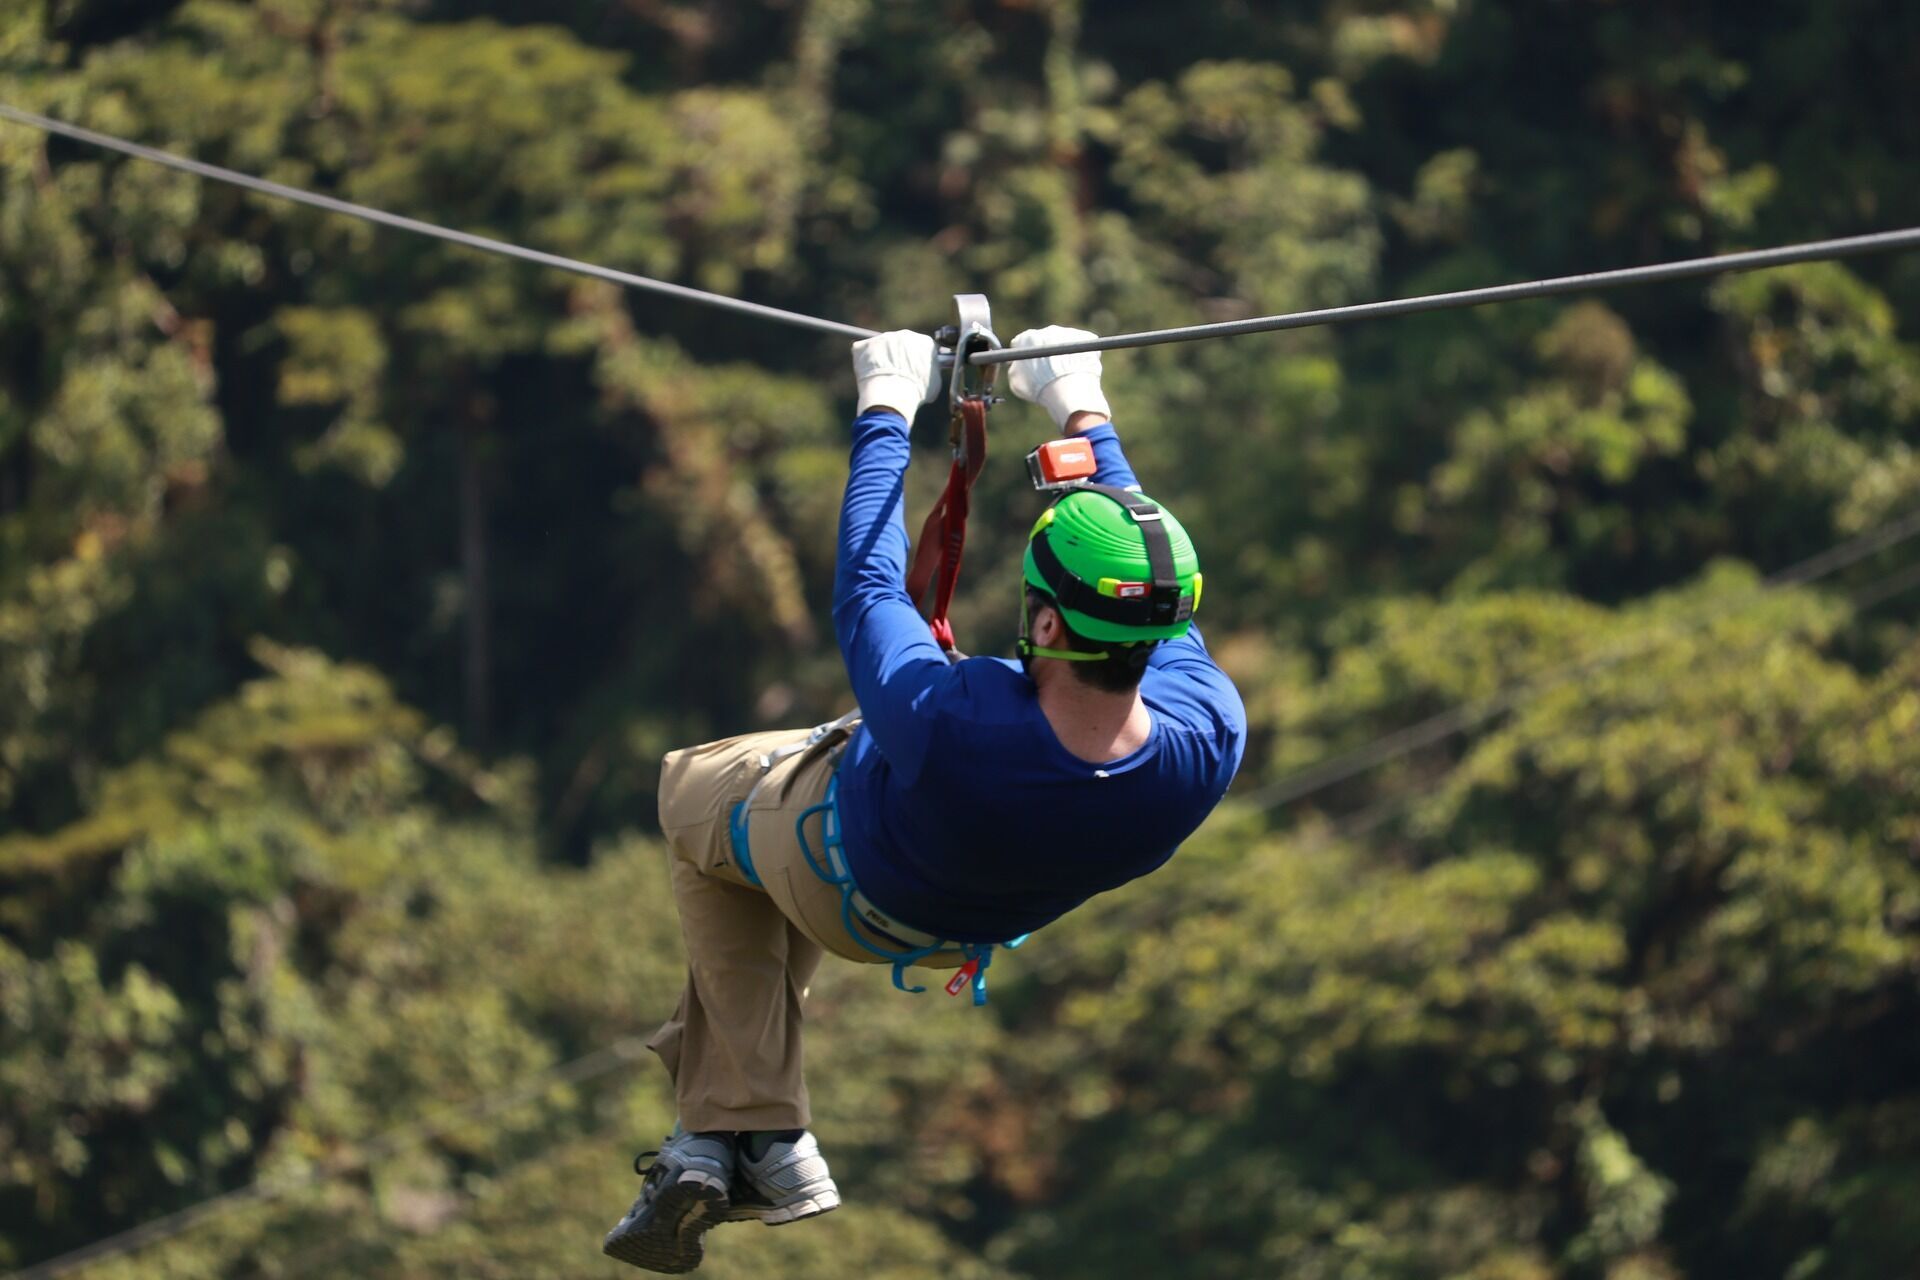 Top 7 most dangerous activities that make your adrenaline go off the charts